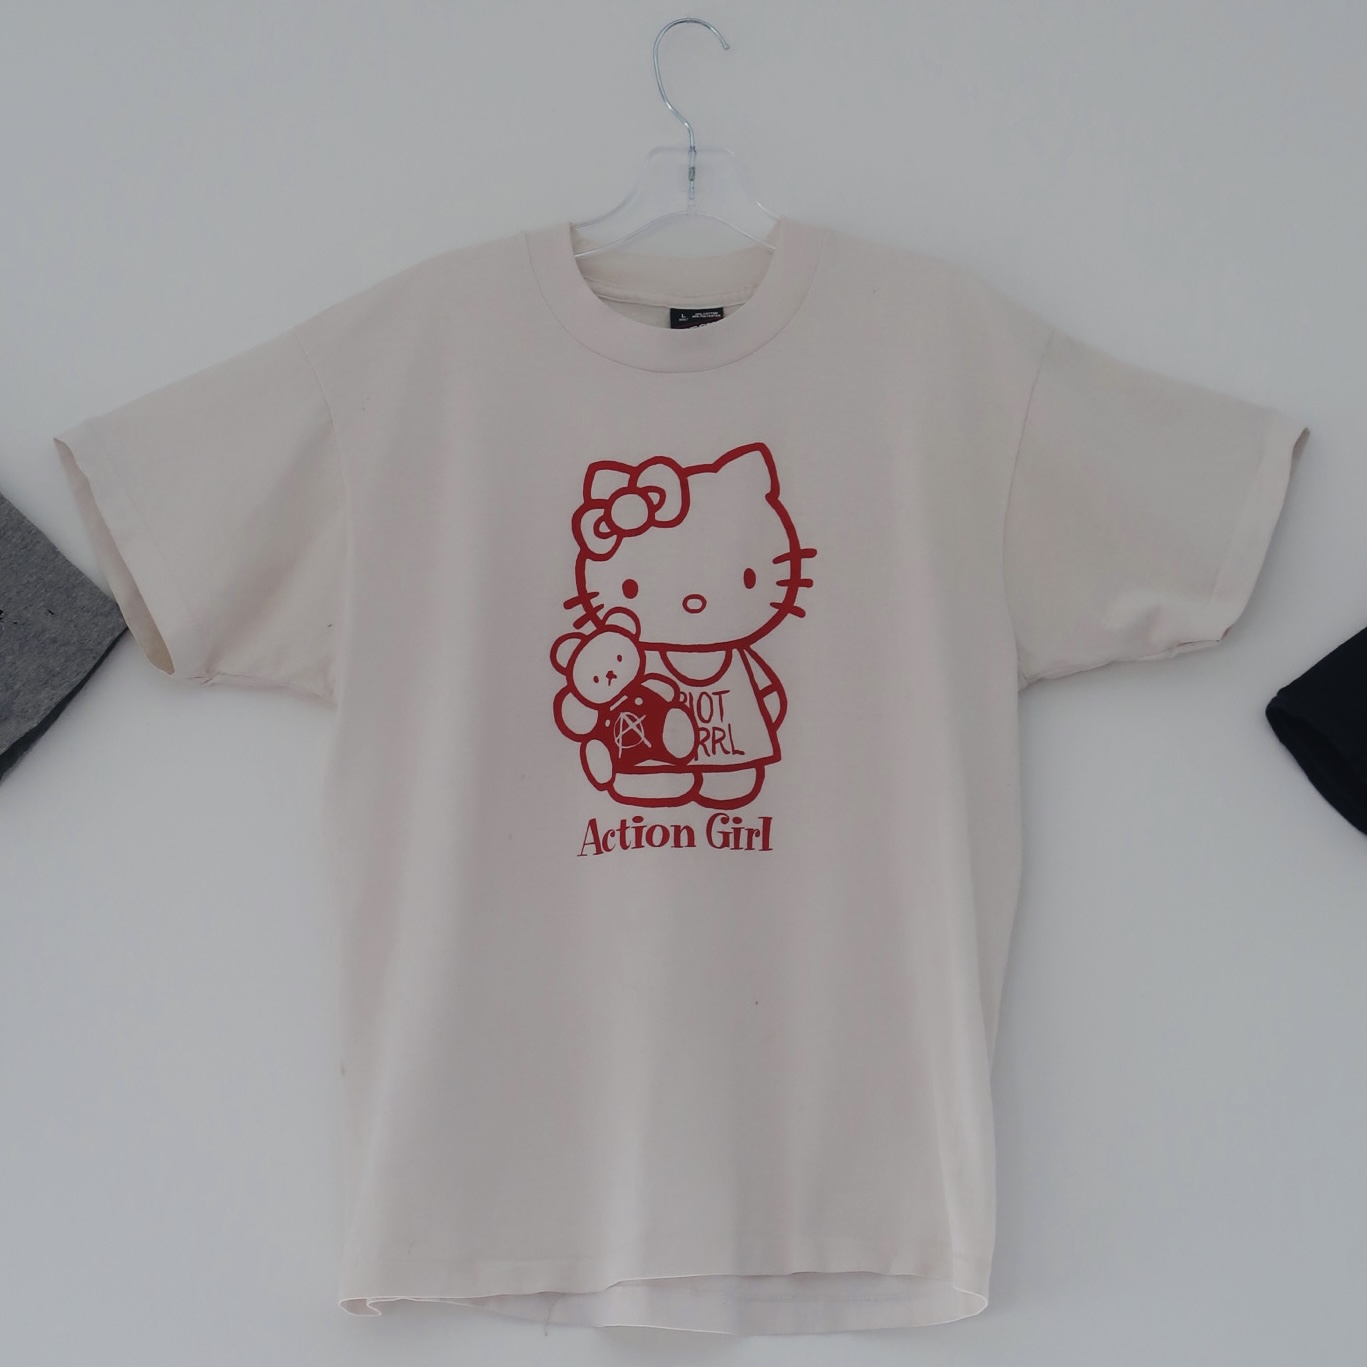 Hello Kitty holding teddy with anarchist symbol printed in red on white t shirt